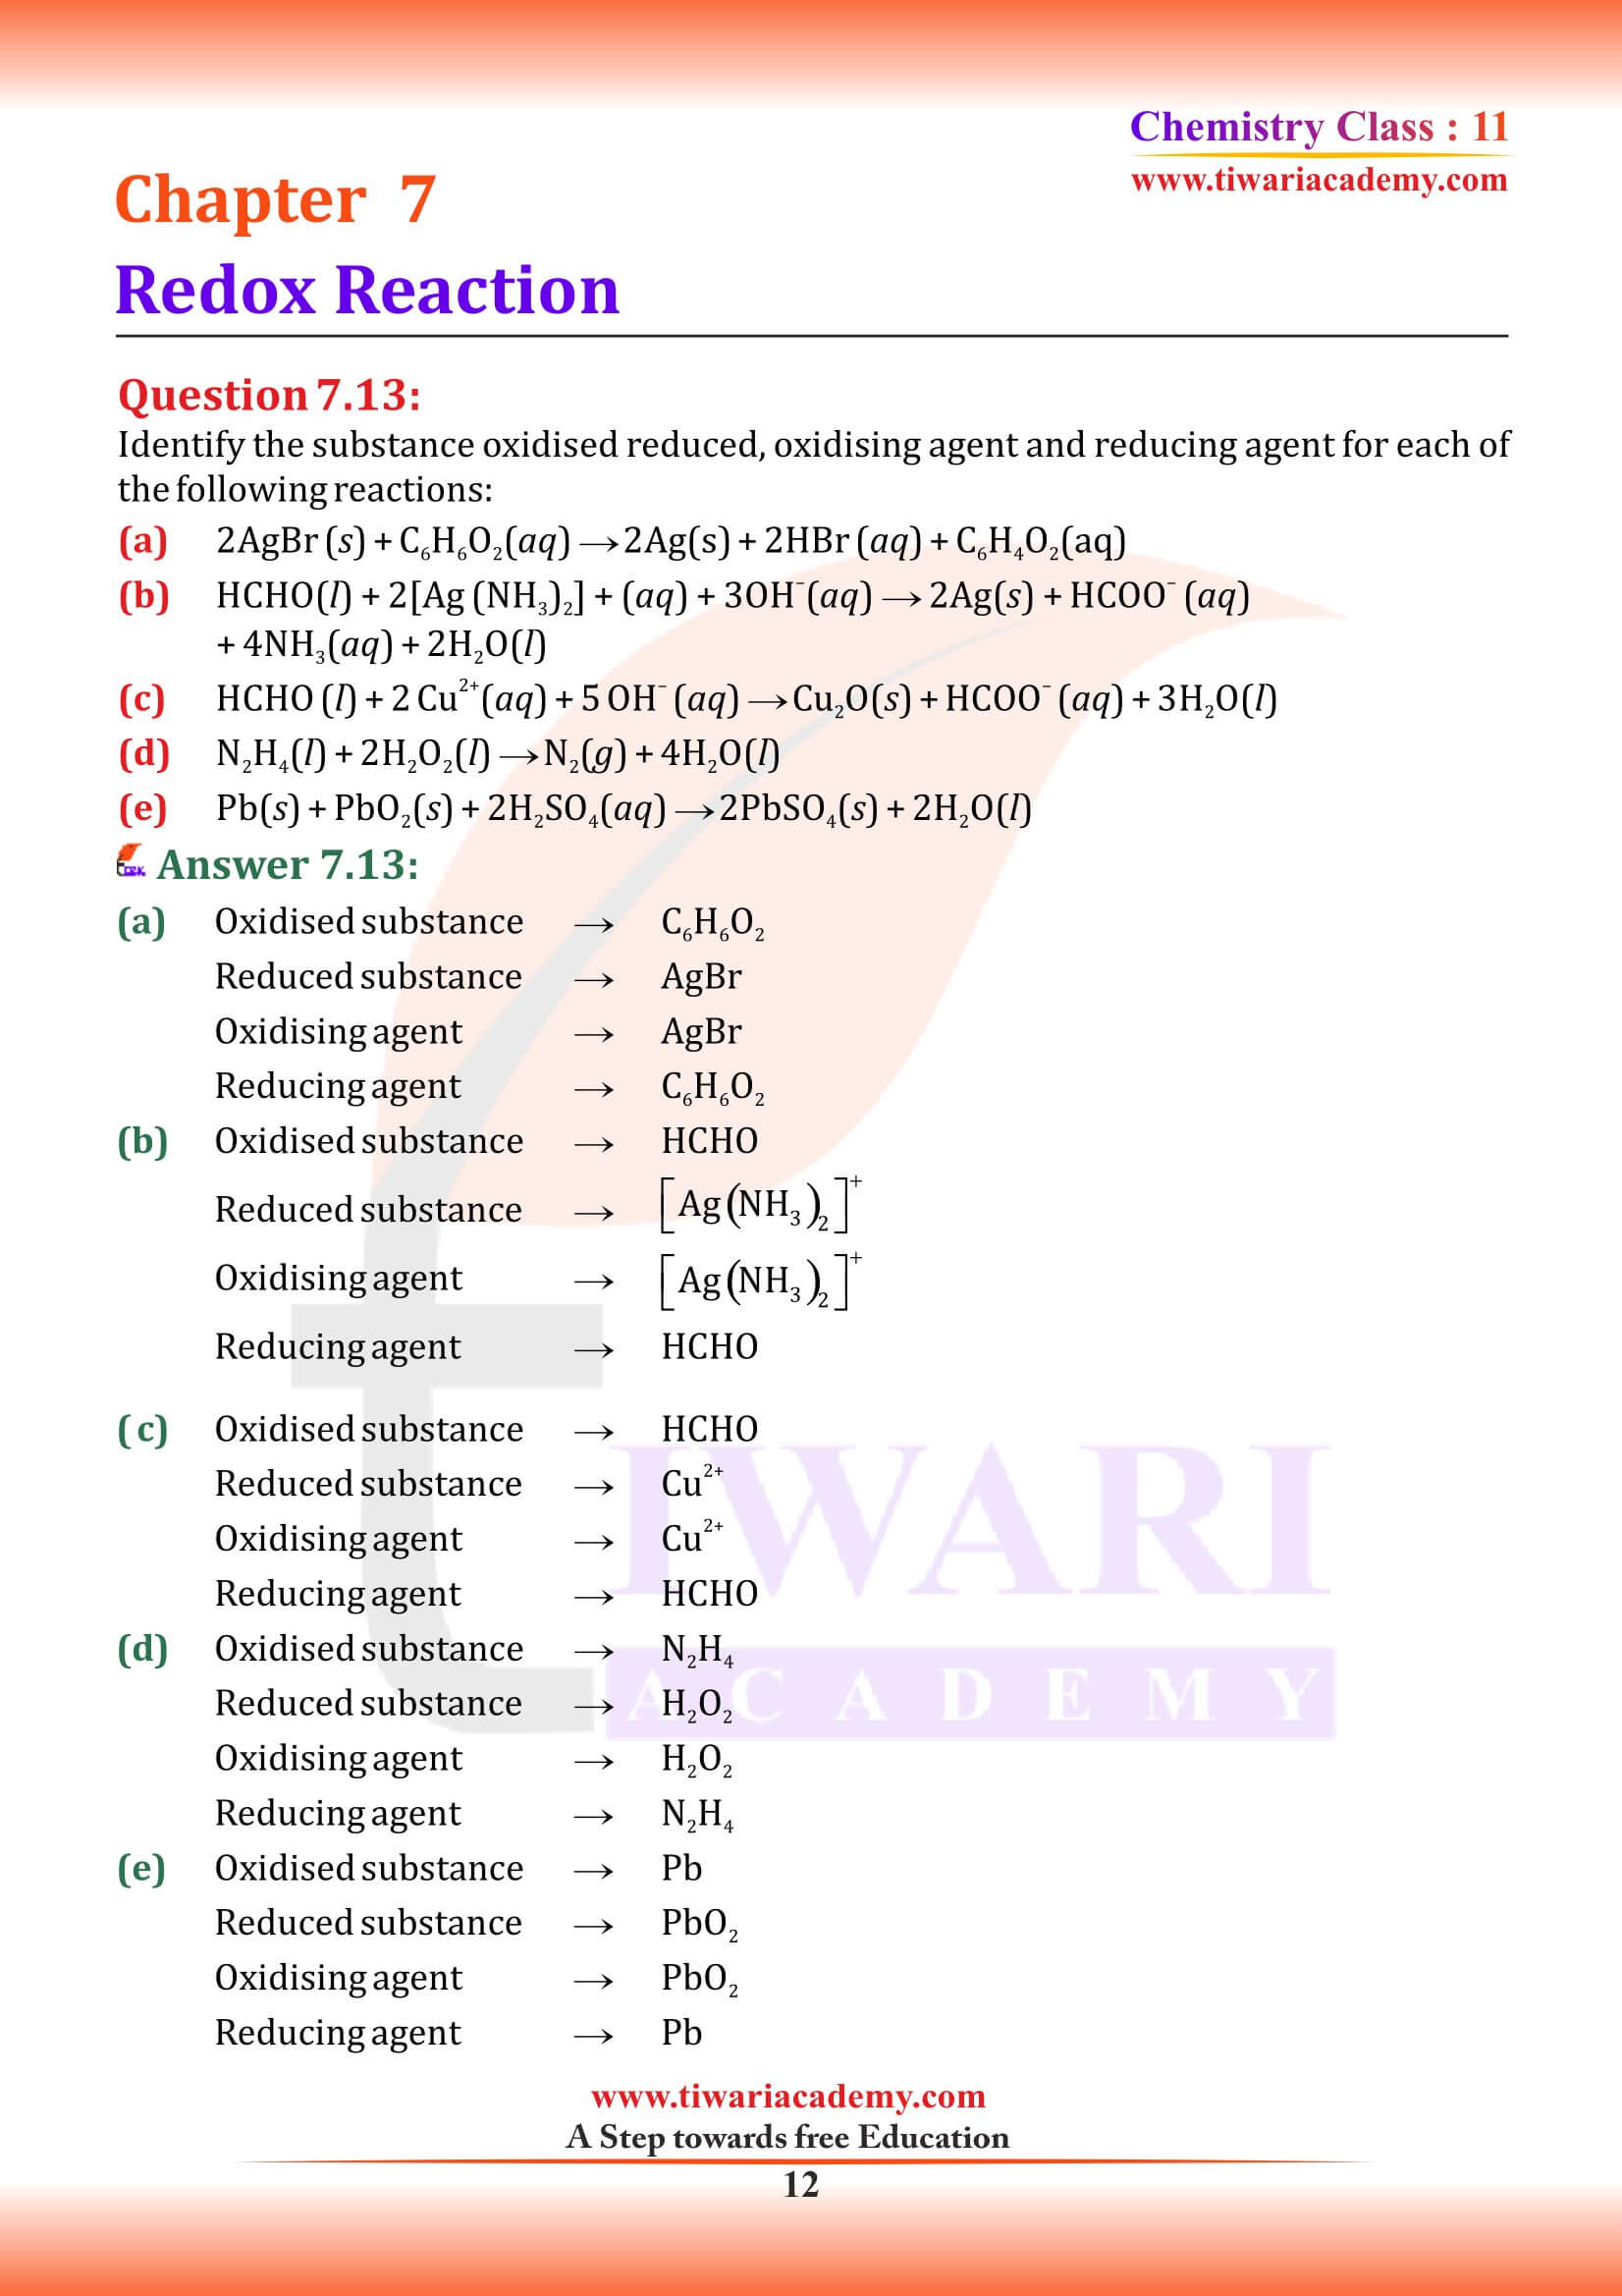 NCERT Class 11 Chemistry Chapter 7 guide